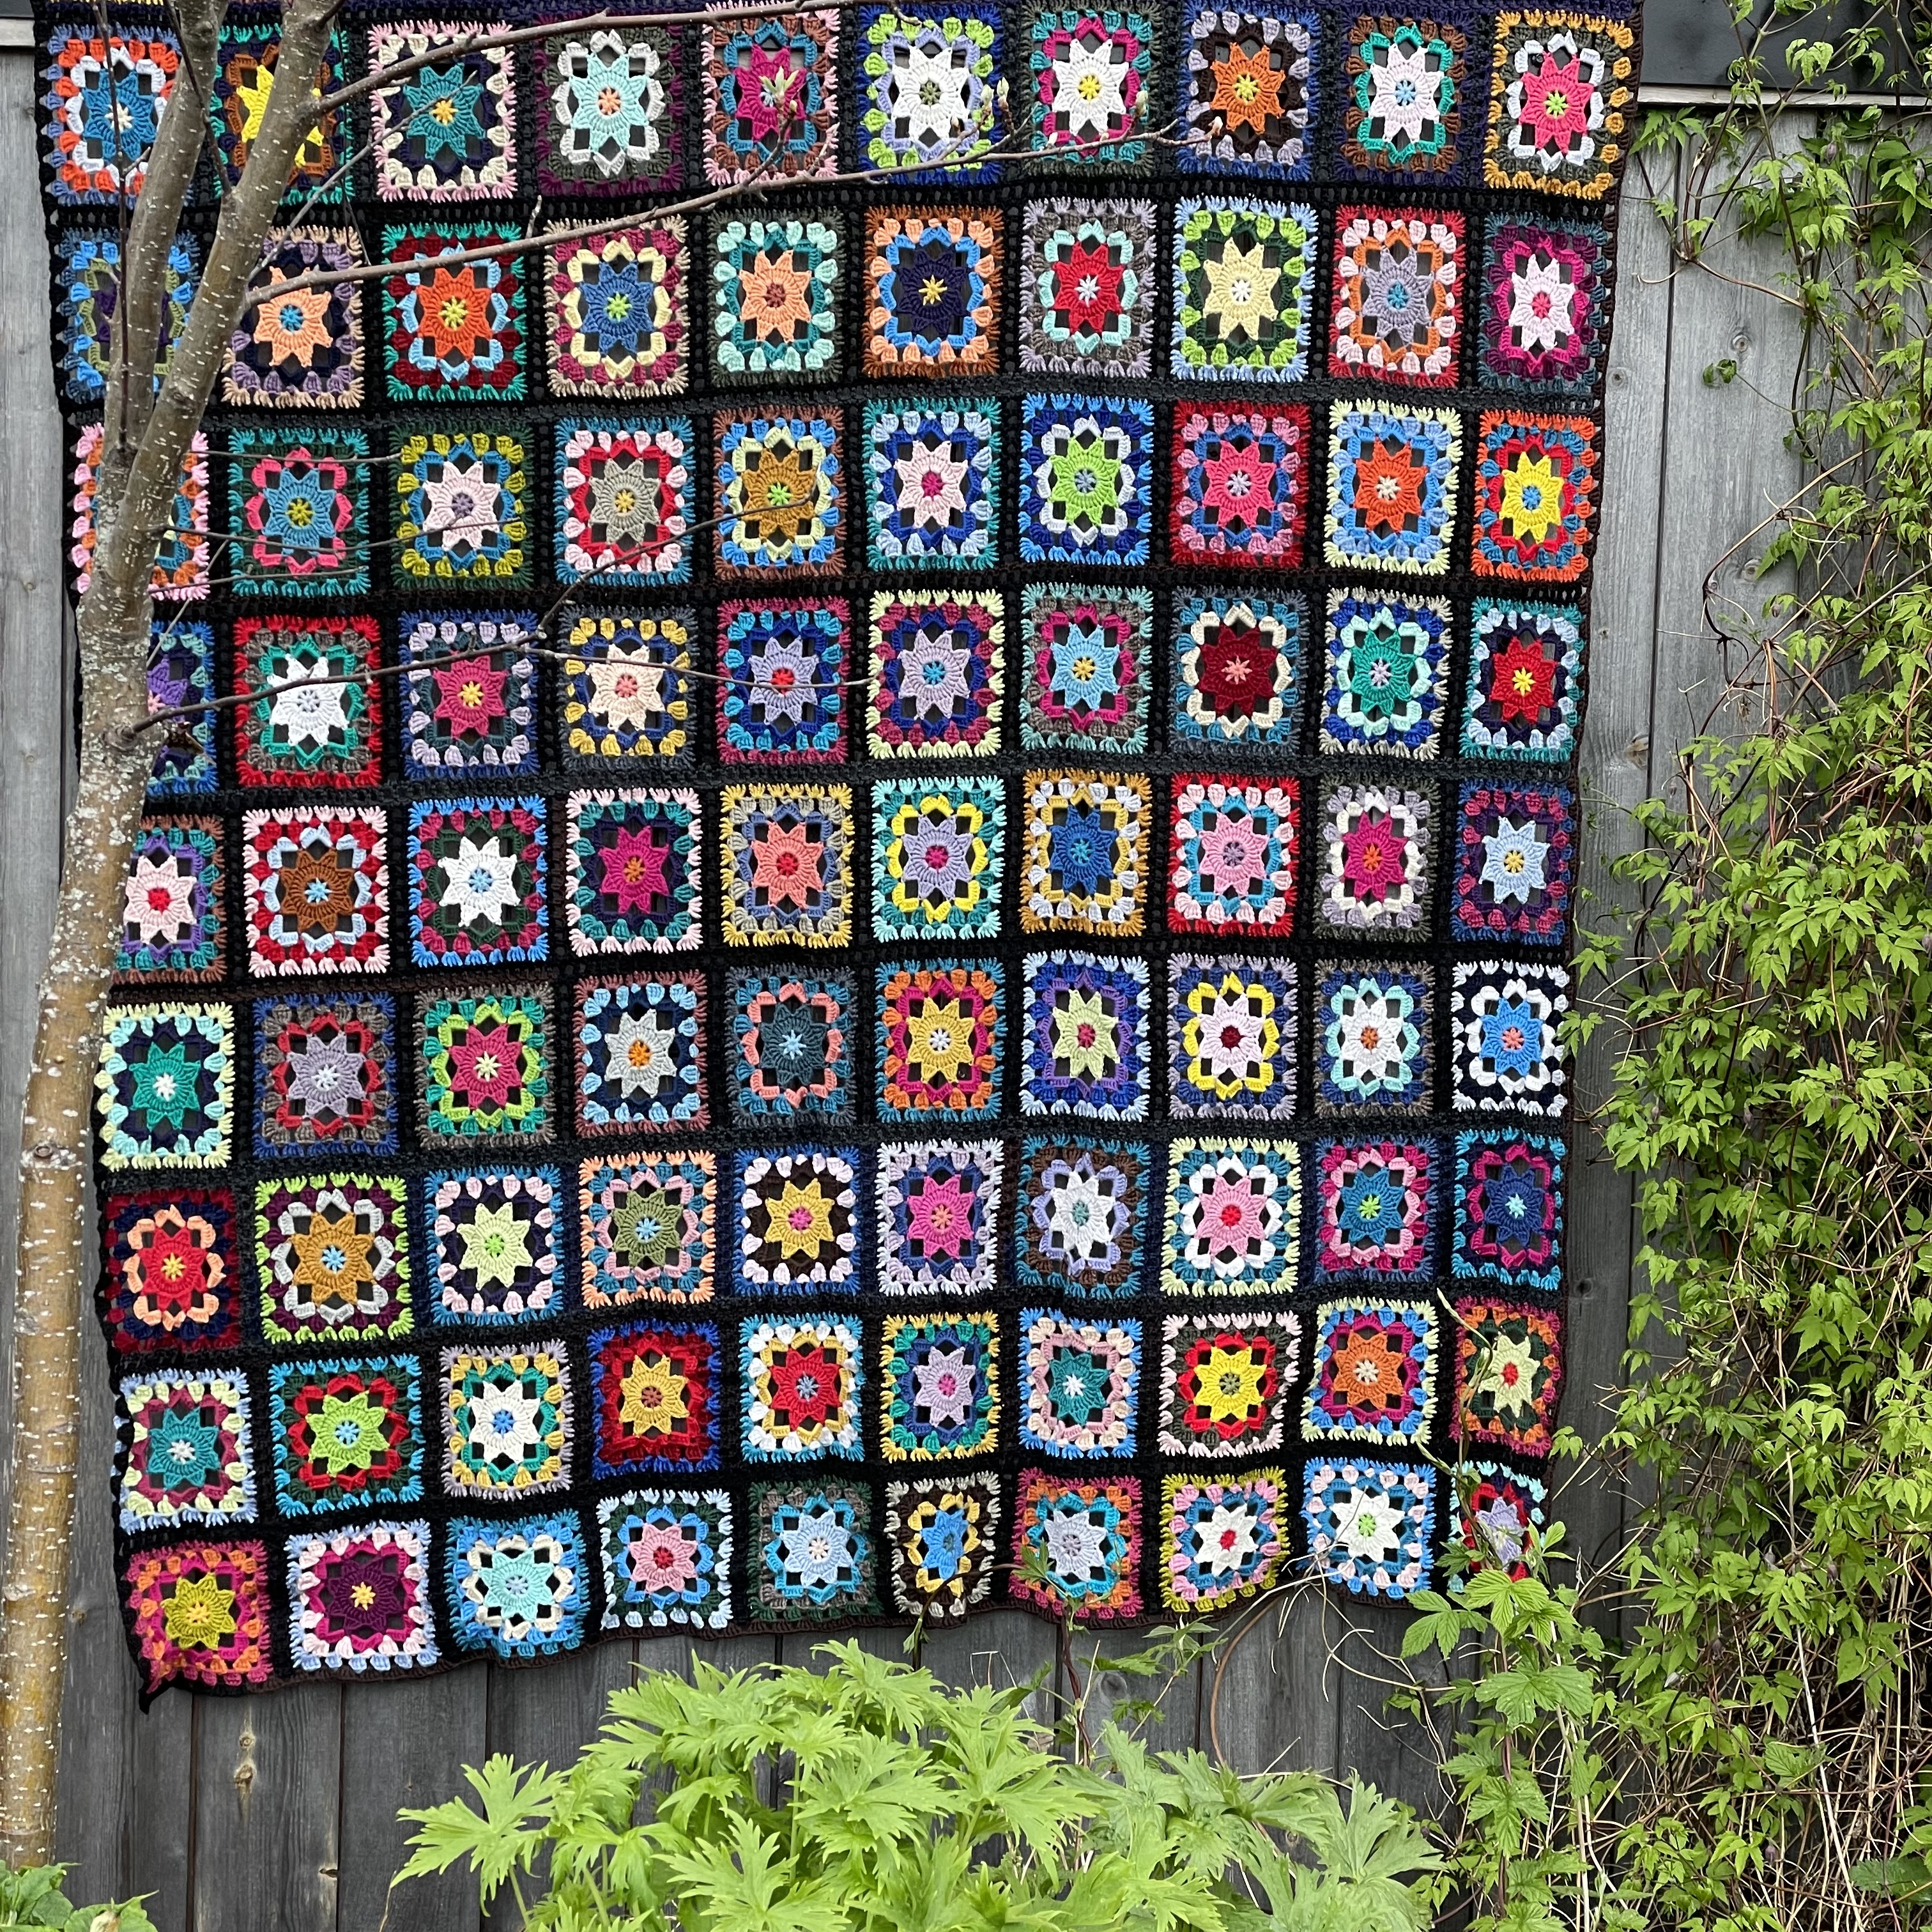 Crochet Granny Square blanket, by Arne & Carlos, see decorative